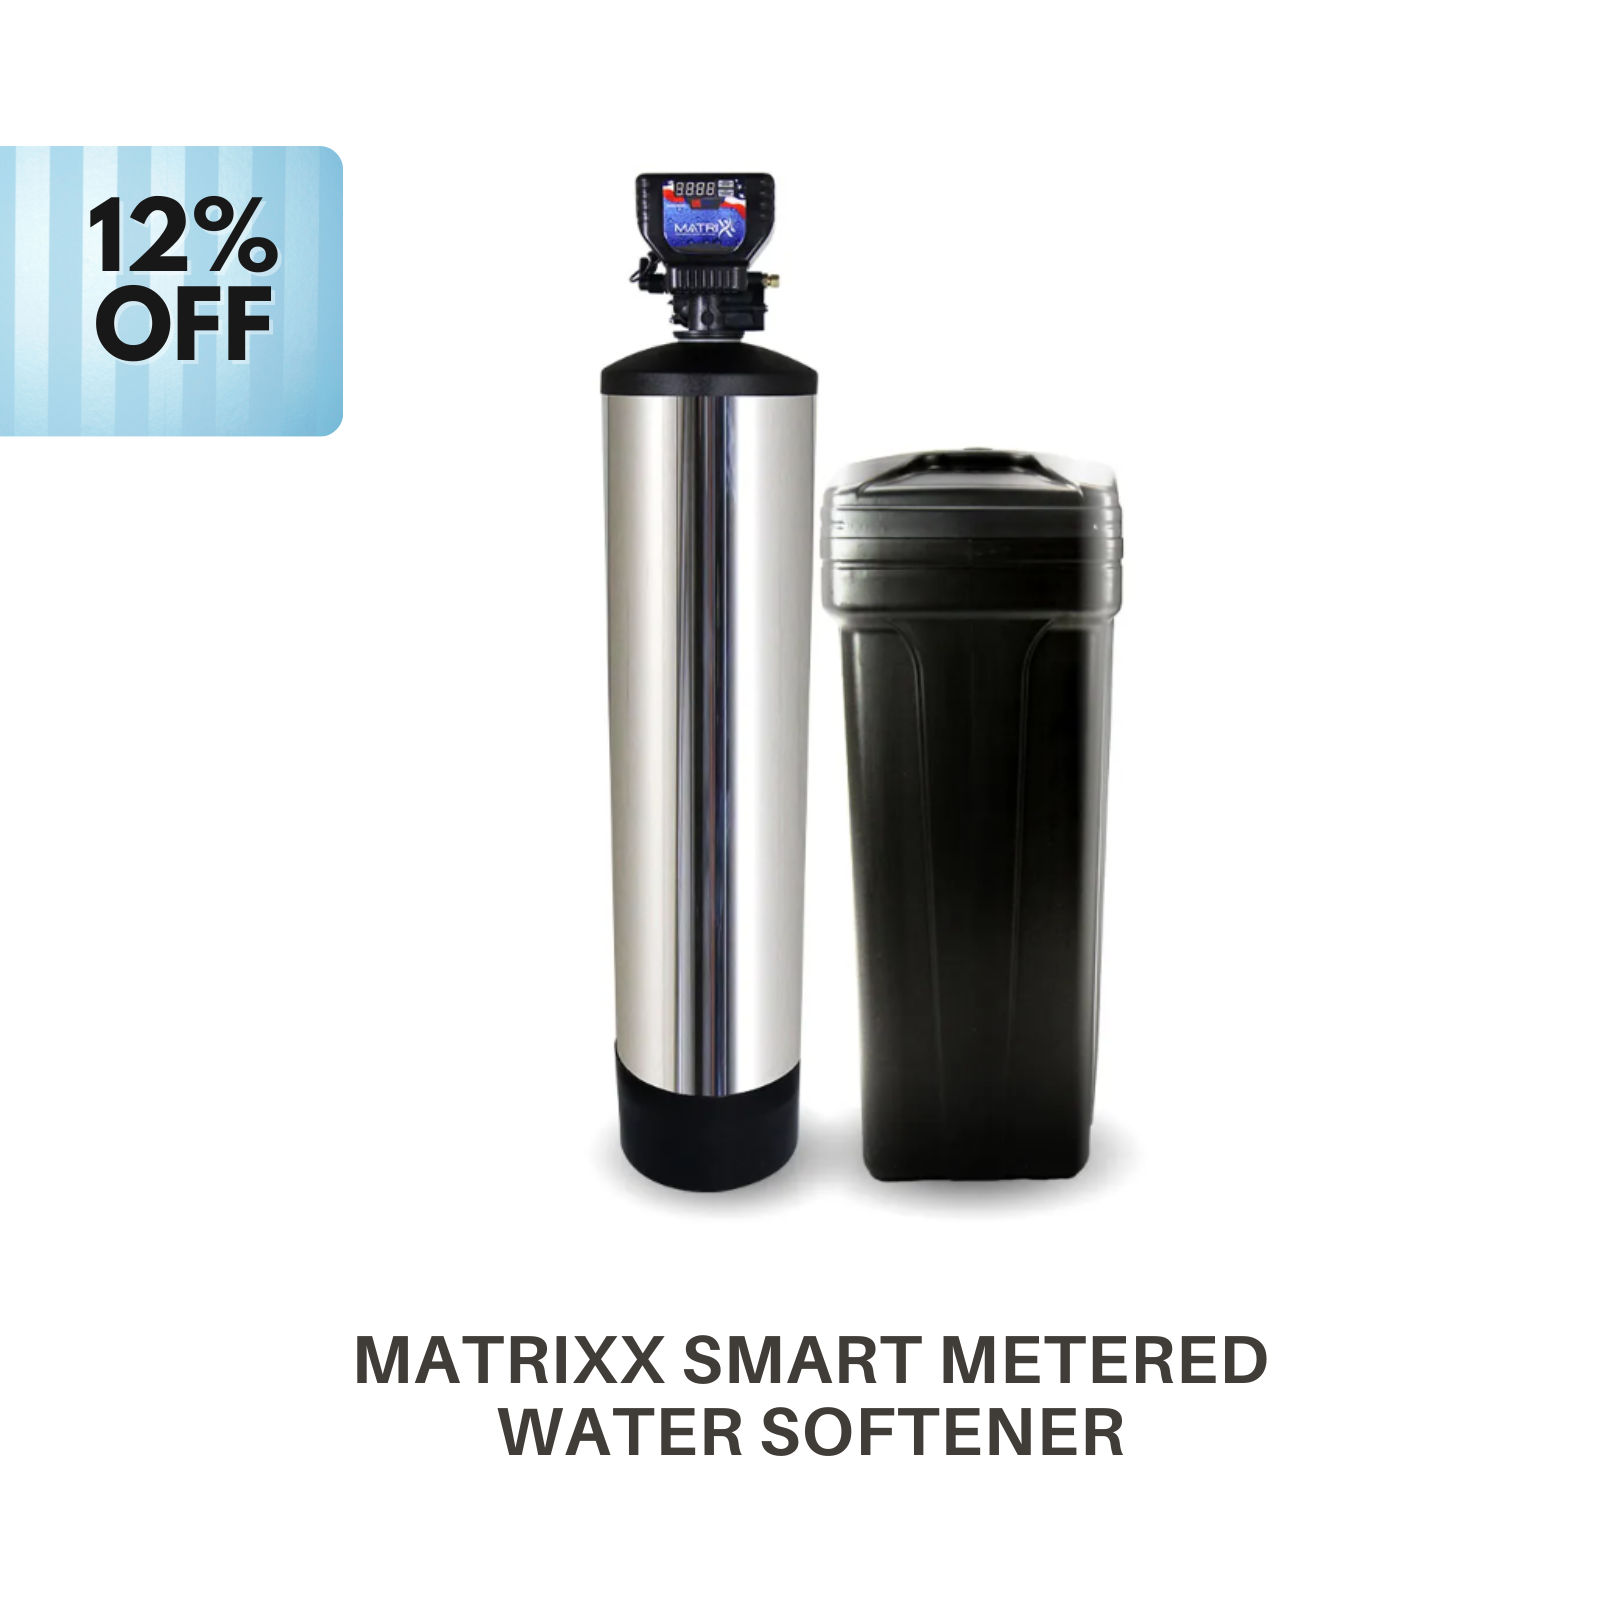 matrixx smart metered water softener from us water systems